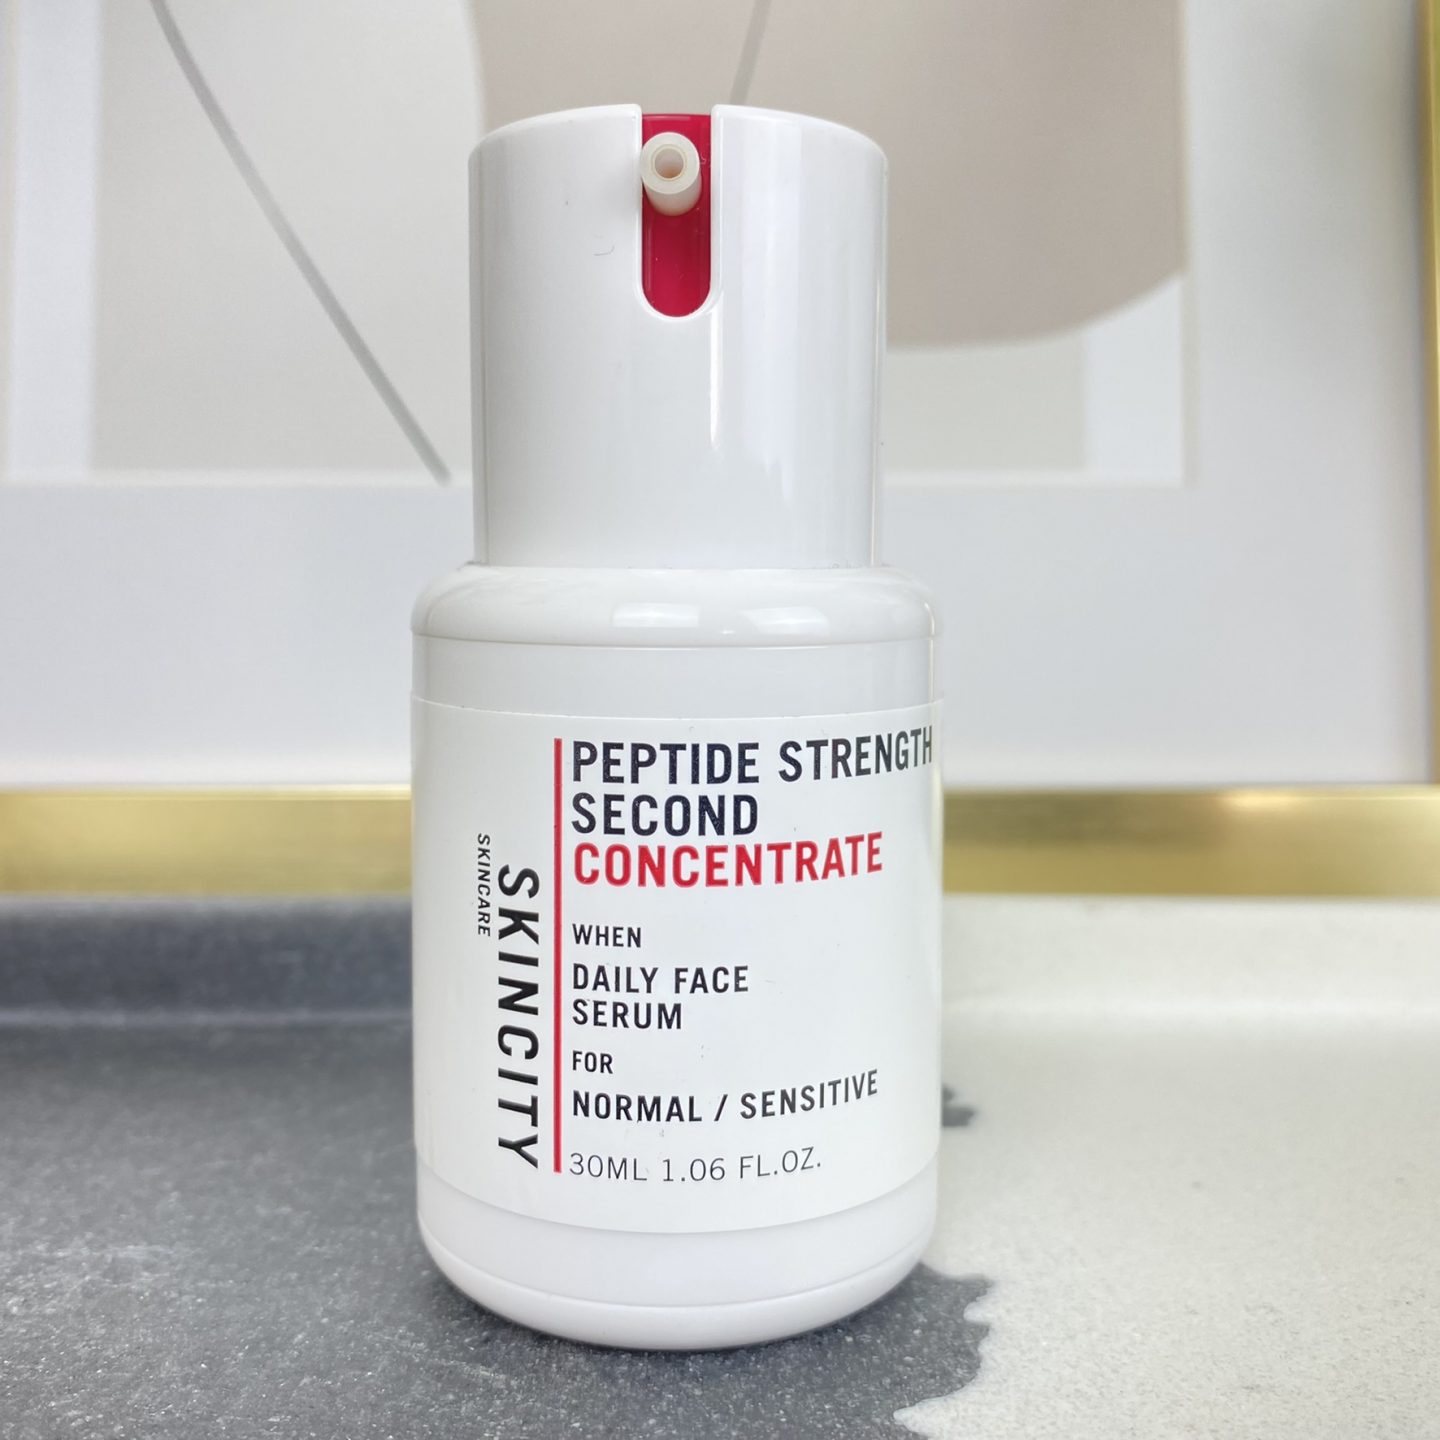 SkinCity Peptide Strength Second Concentrate